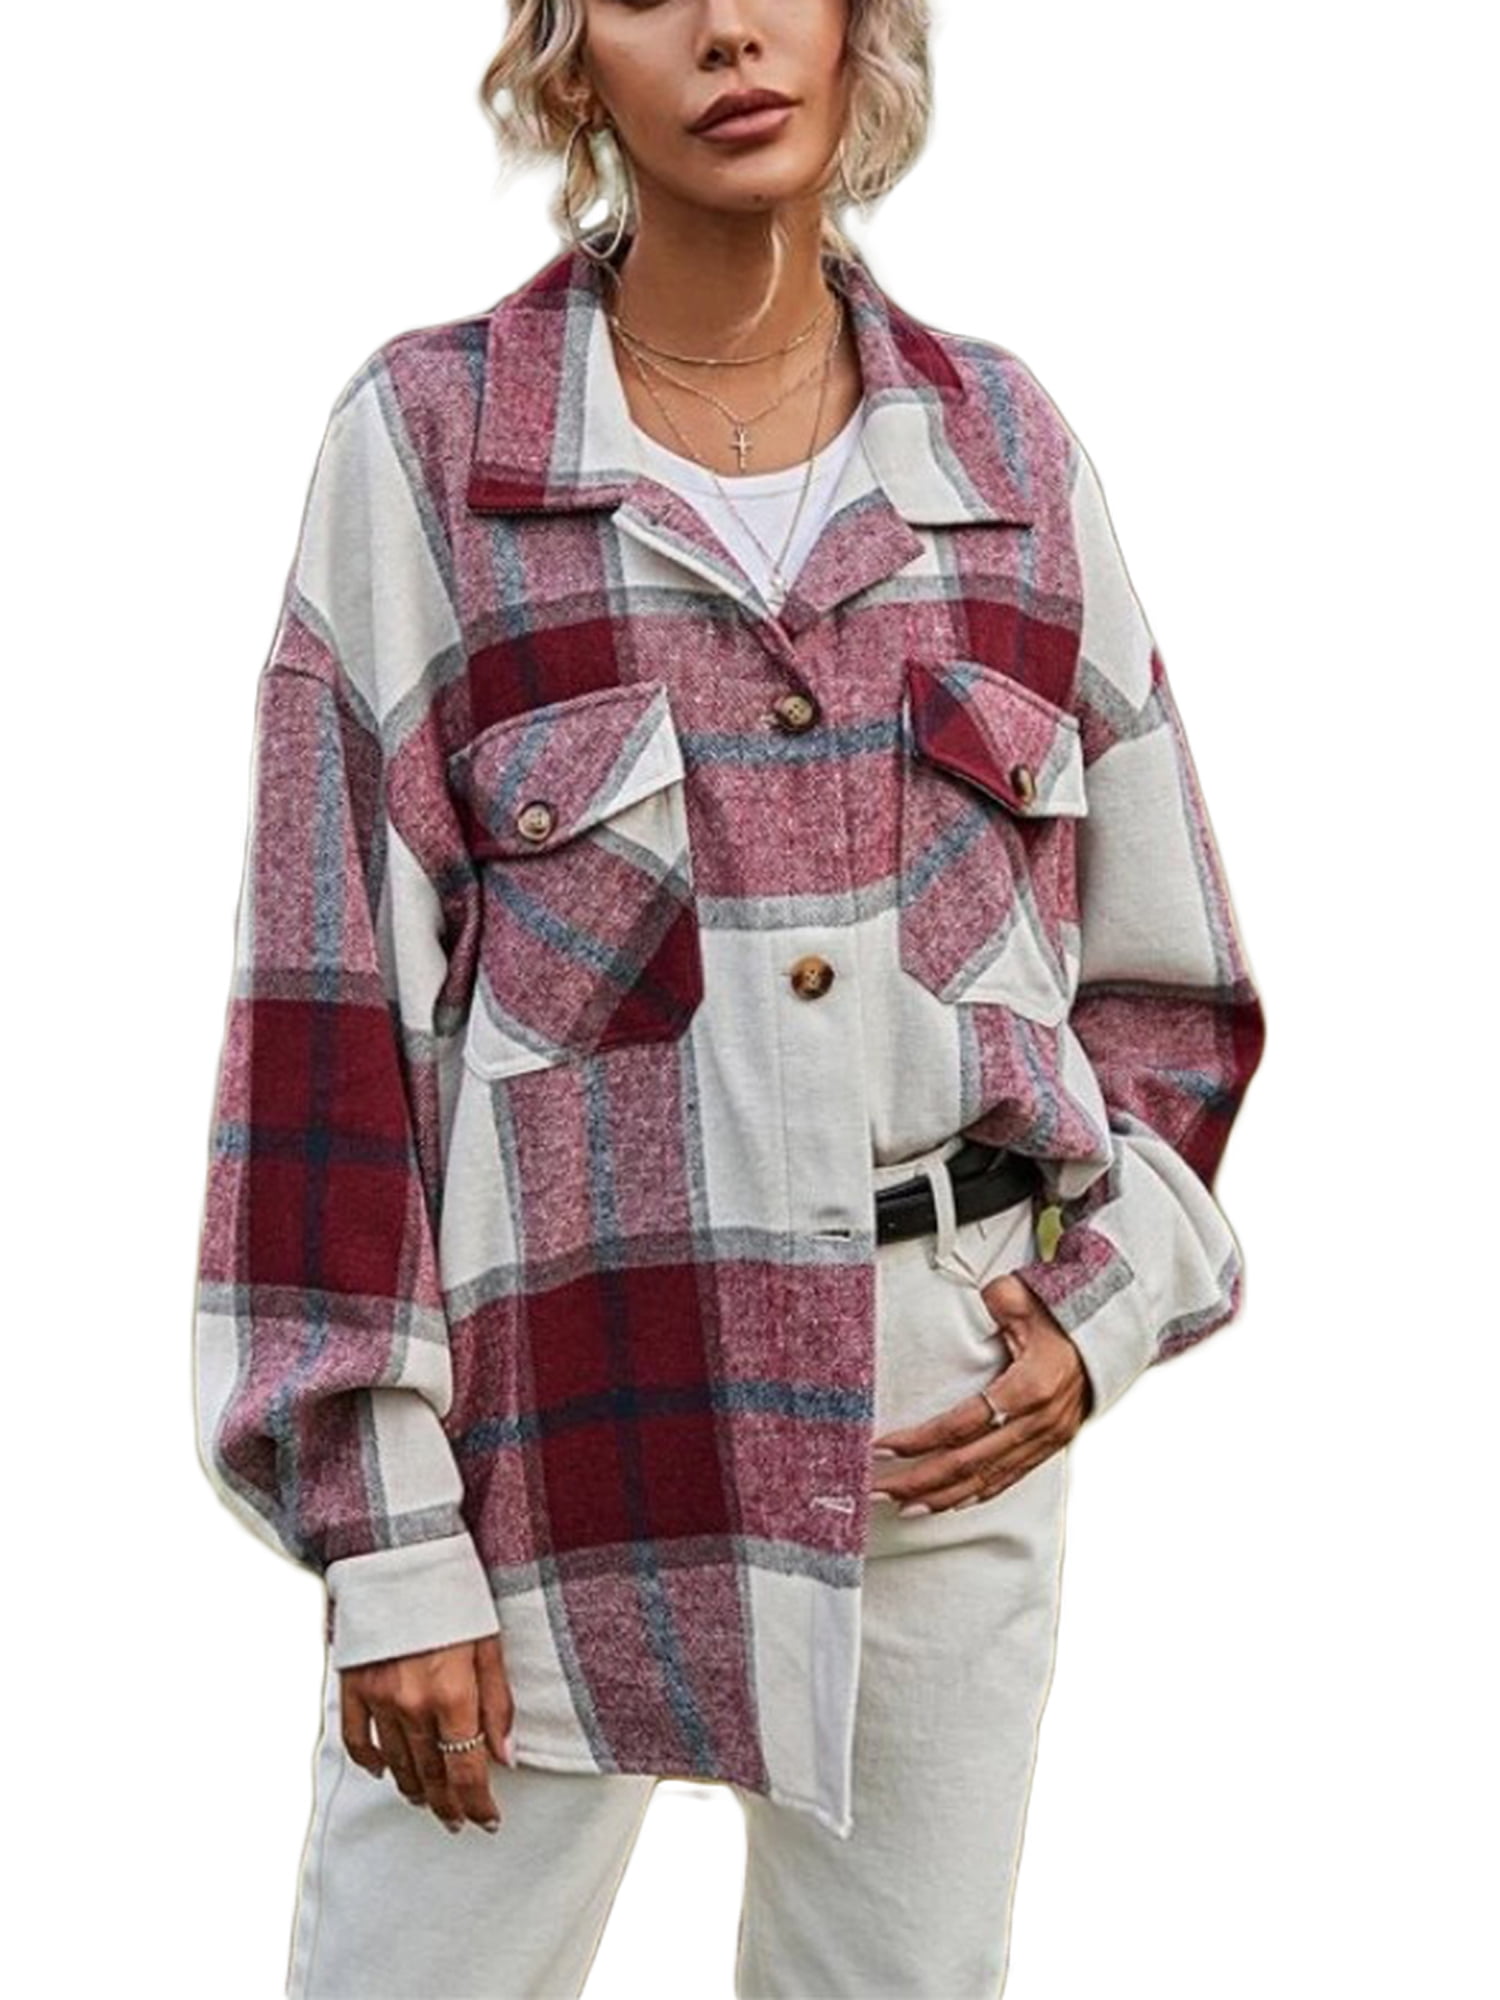 Women Plaid Contrast Color Casual Turn Down Collar Long Sleeve Long Jacket Coat 